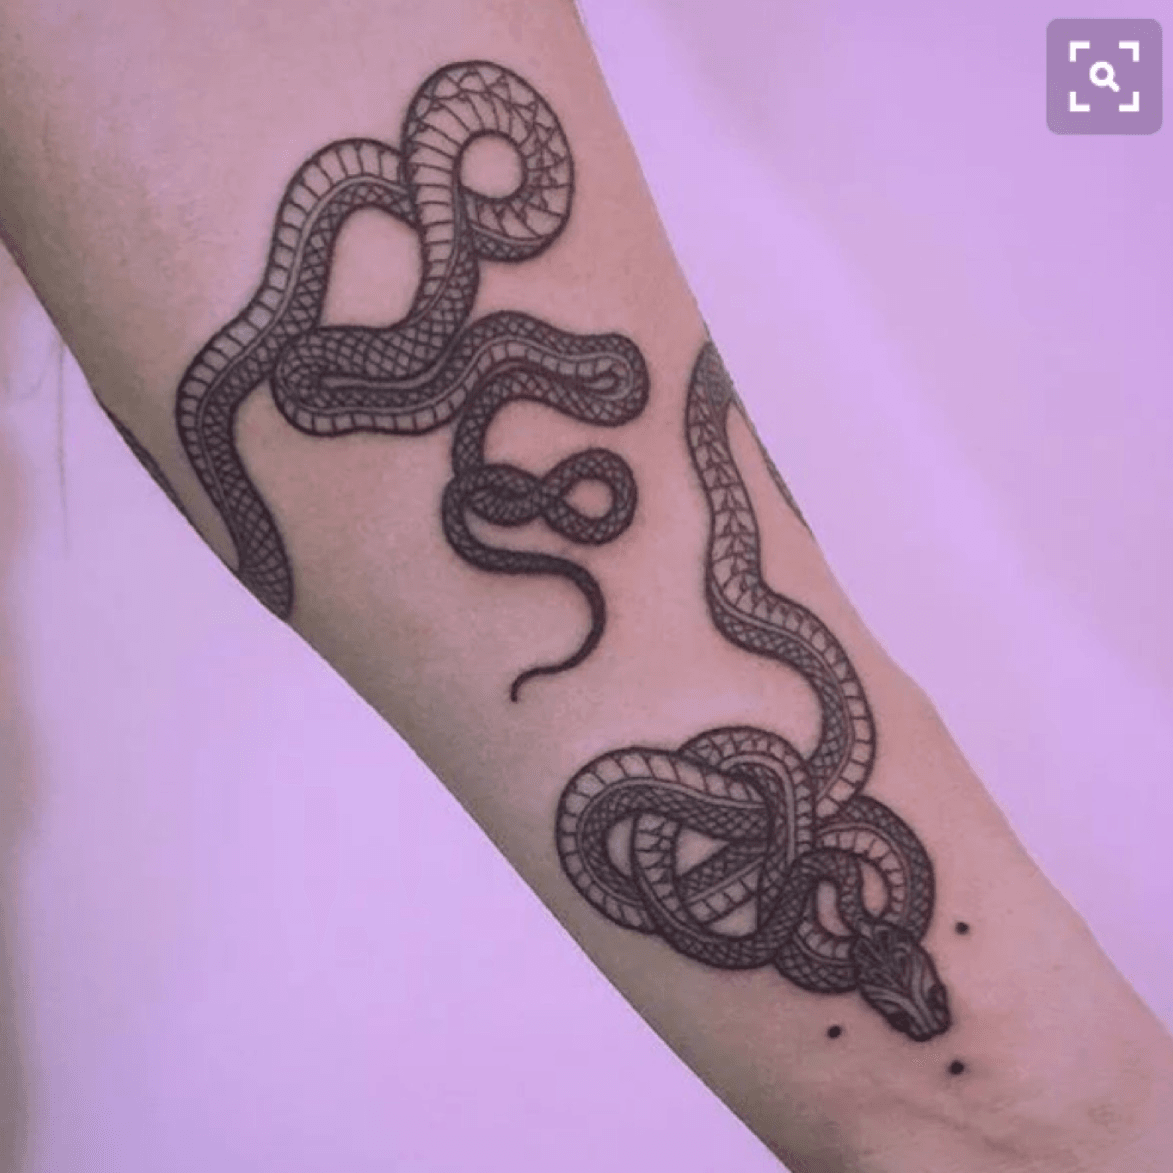 55 Snake Tattoo Meanings Designs and Ideas Everything You Need to Kno   neartattoos